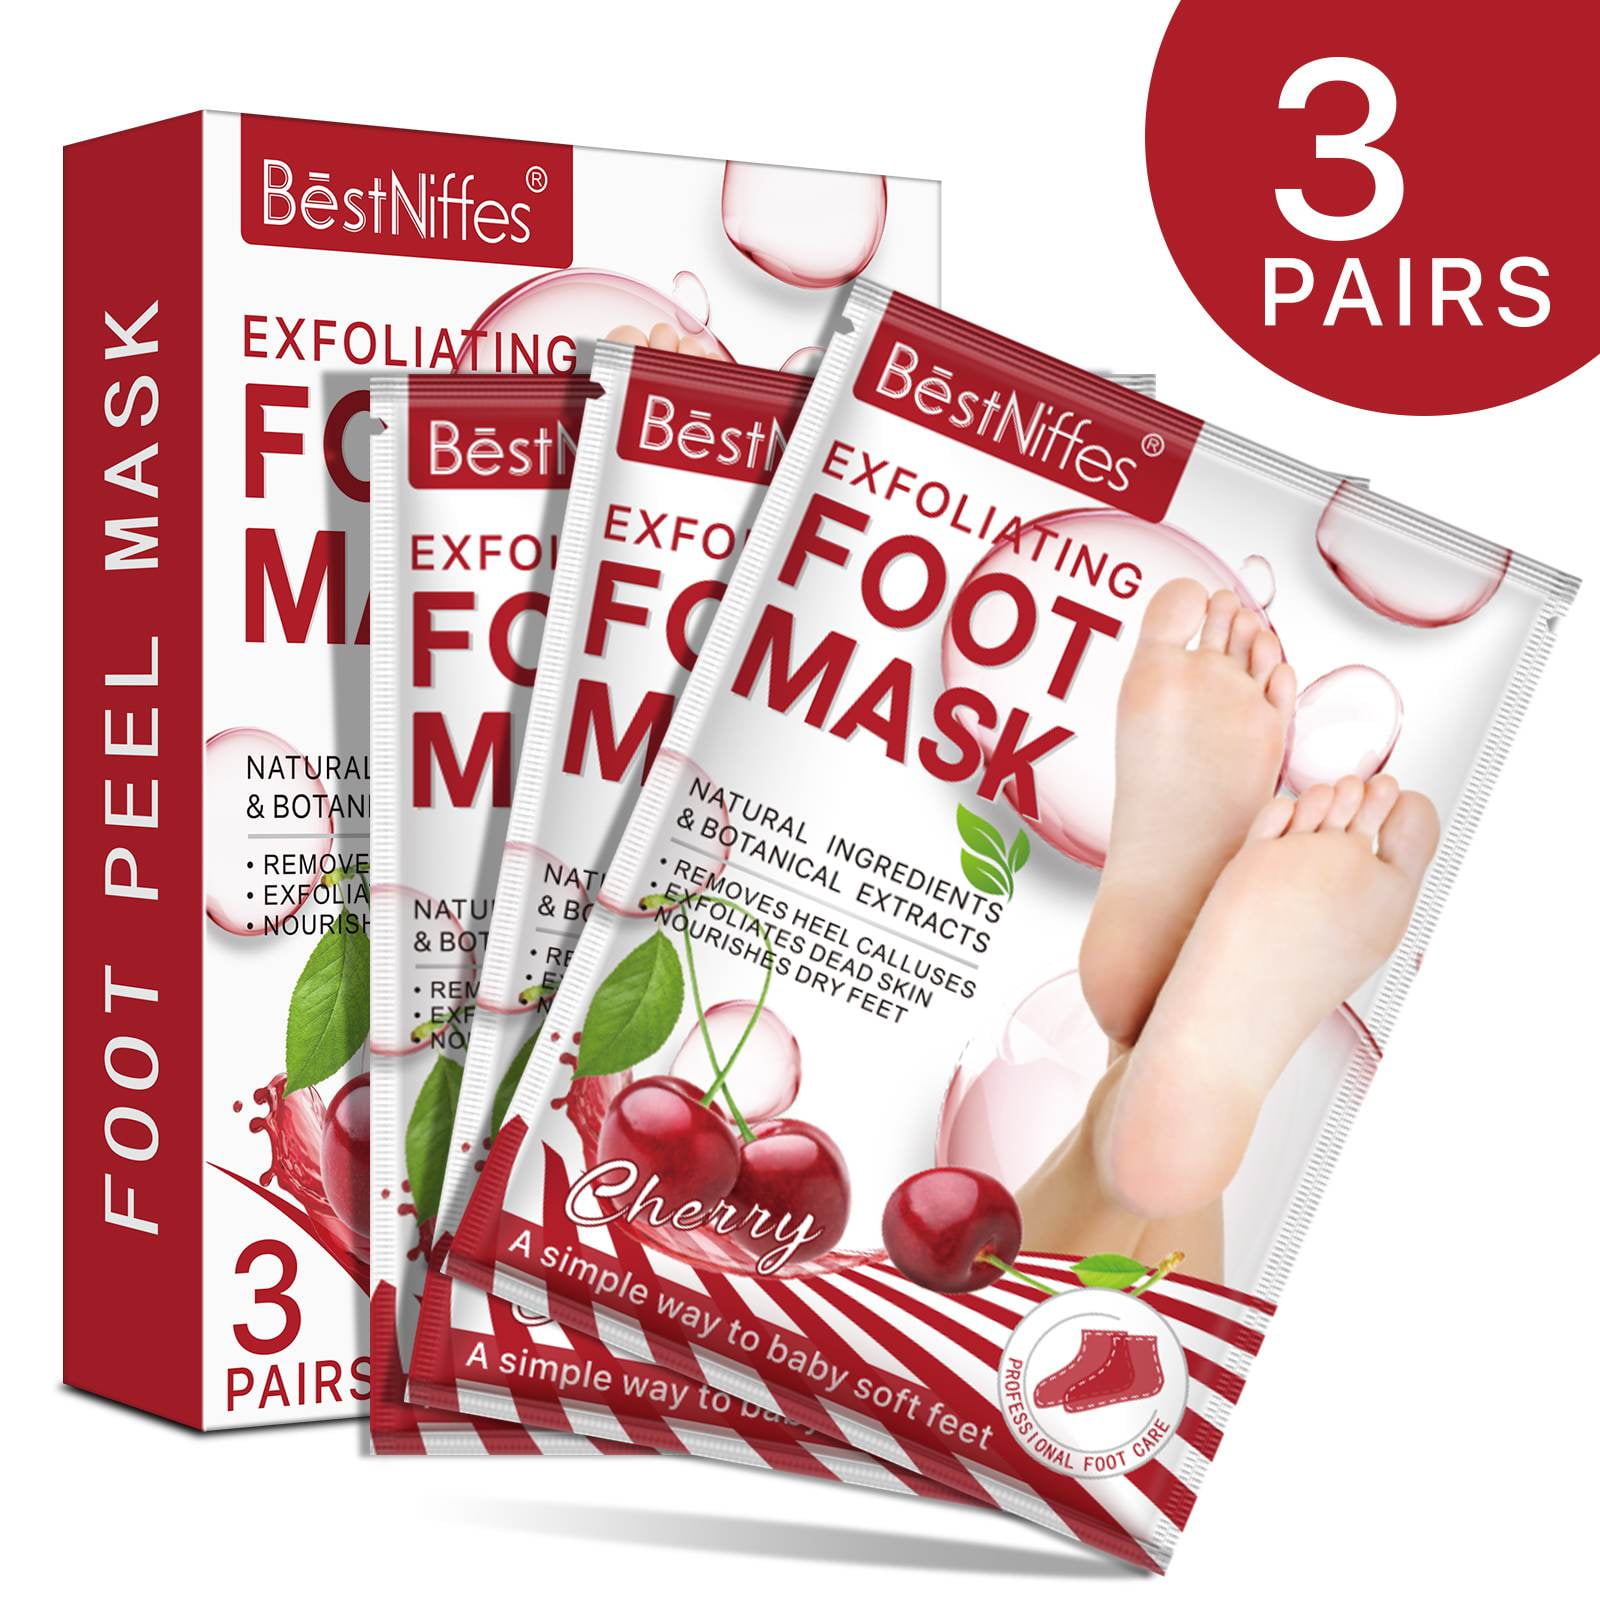 12 Best Foot Peels & Masks for Softer, Smoother Feet in 2023